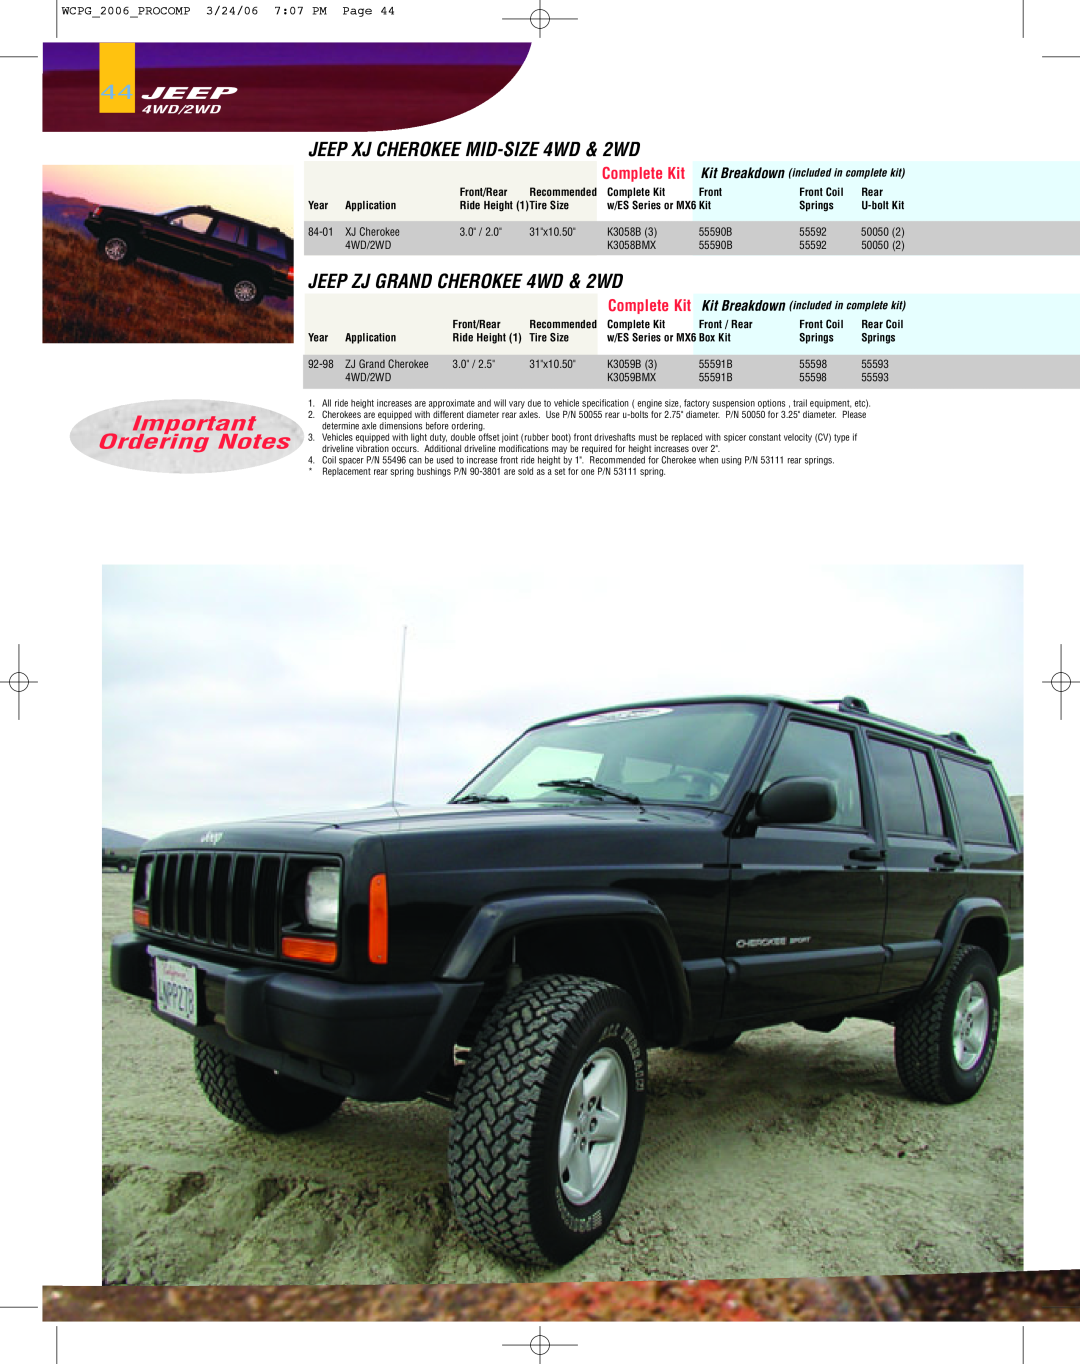 Jeep JEEP XJ CHEROKEE MID-SIZE4WD & 2WD, JEEP ZJ GRAND CHEROKEE 4WD & 2WD, 44JEEP, Ordering Notes, Complete Kit 